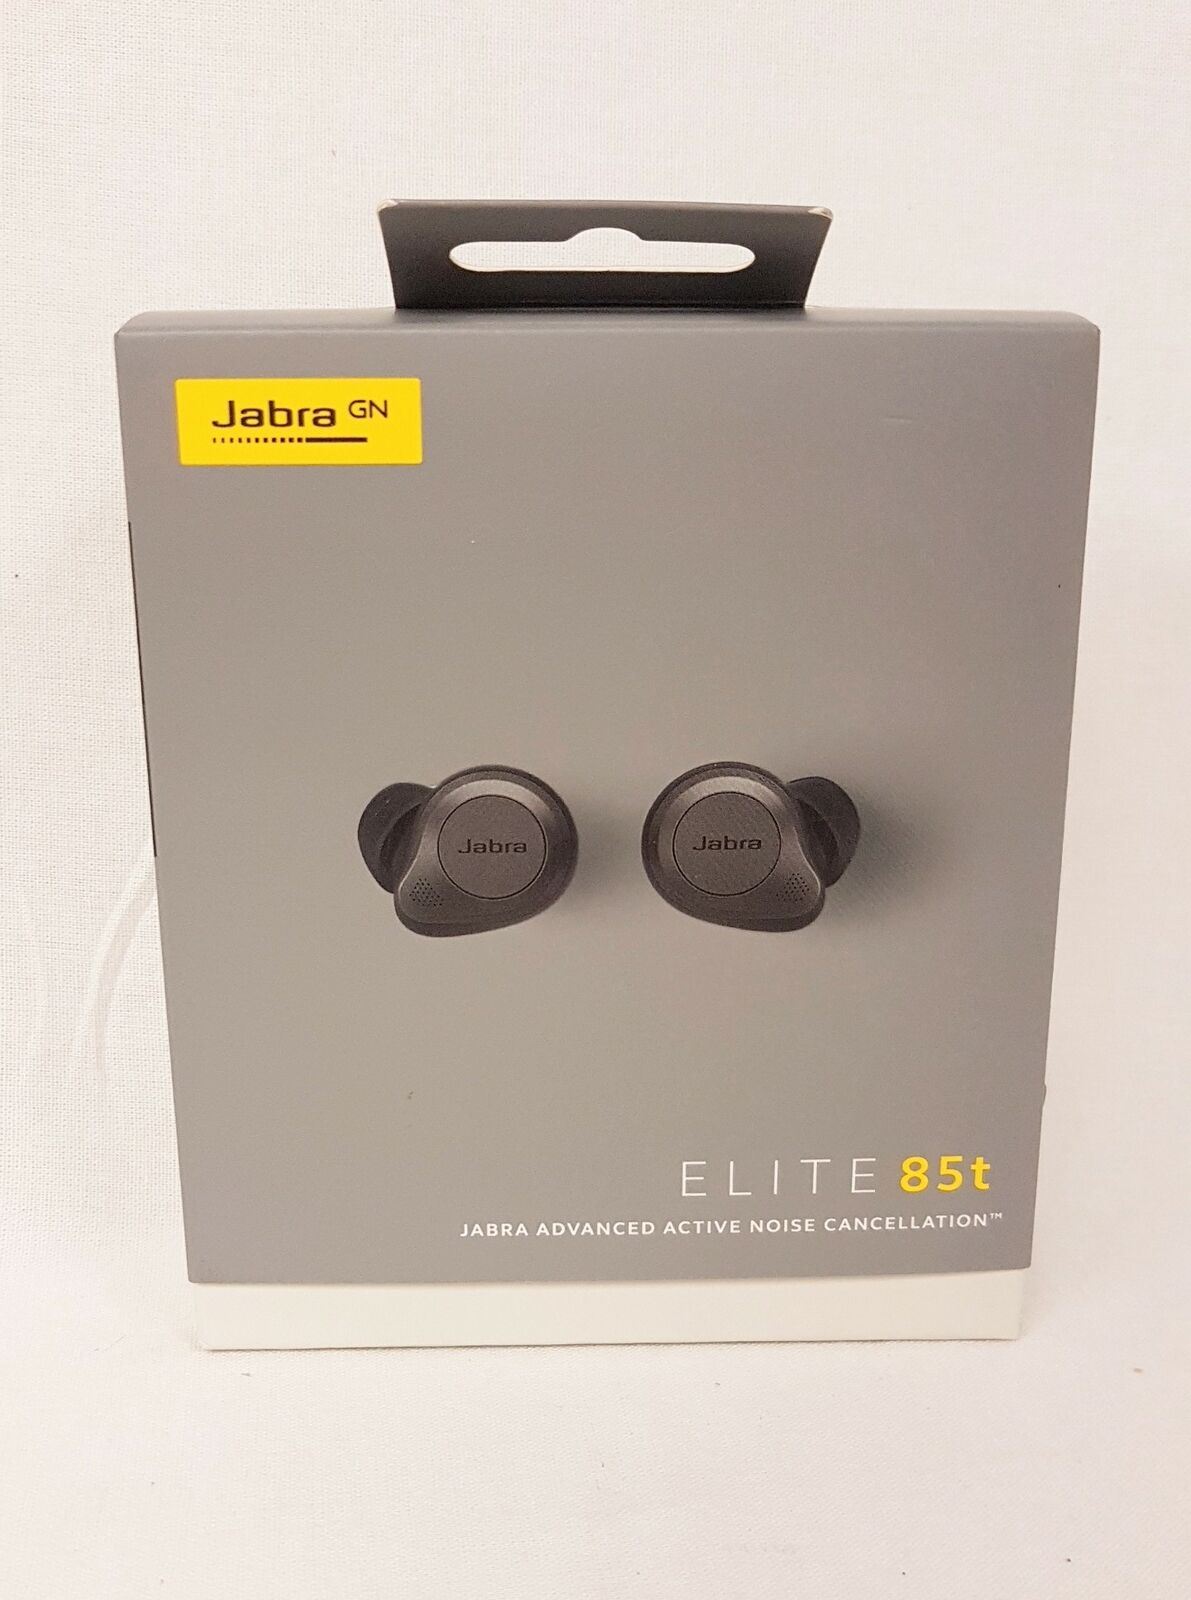 Jabra Elite 85t True Wireless Bluetooth Earbuds, Titanium Black – Advanced  Noise-Cancelling Earbuds with Charging Case for Calls & Music – Wireless